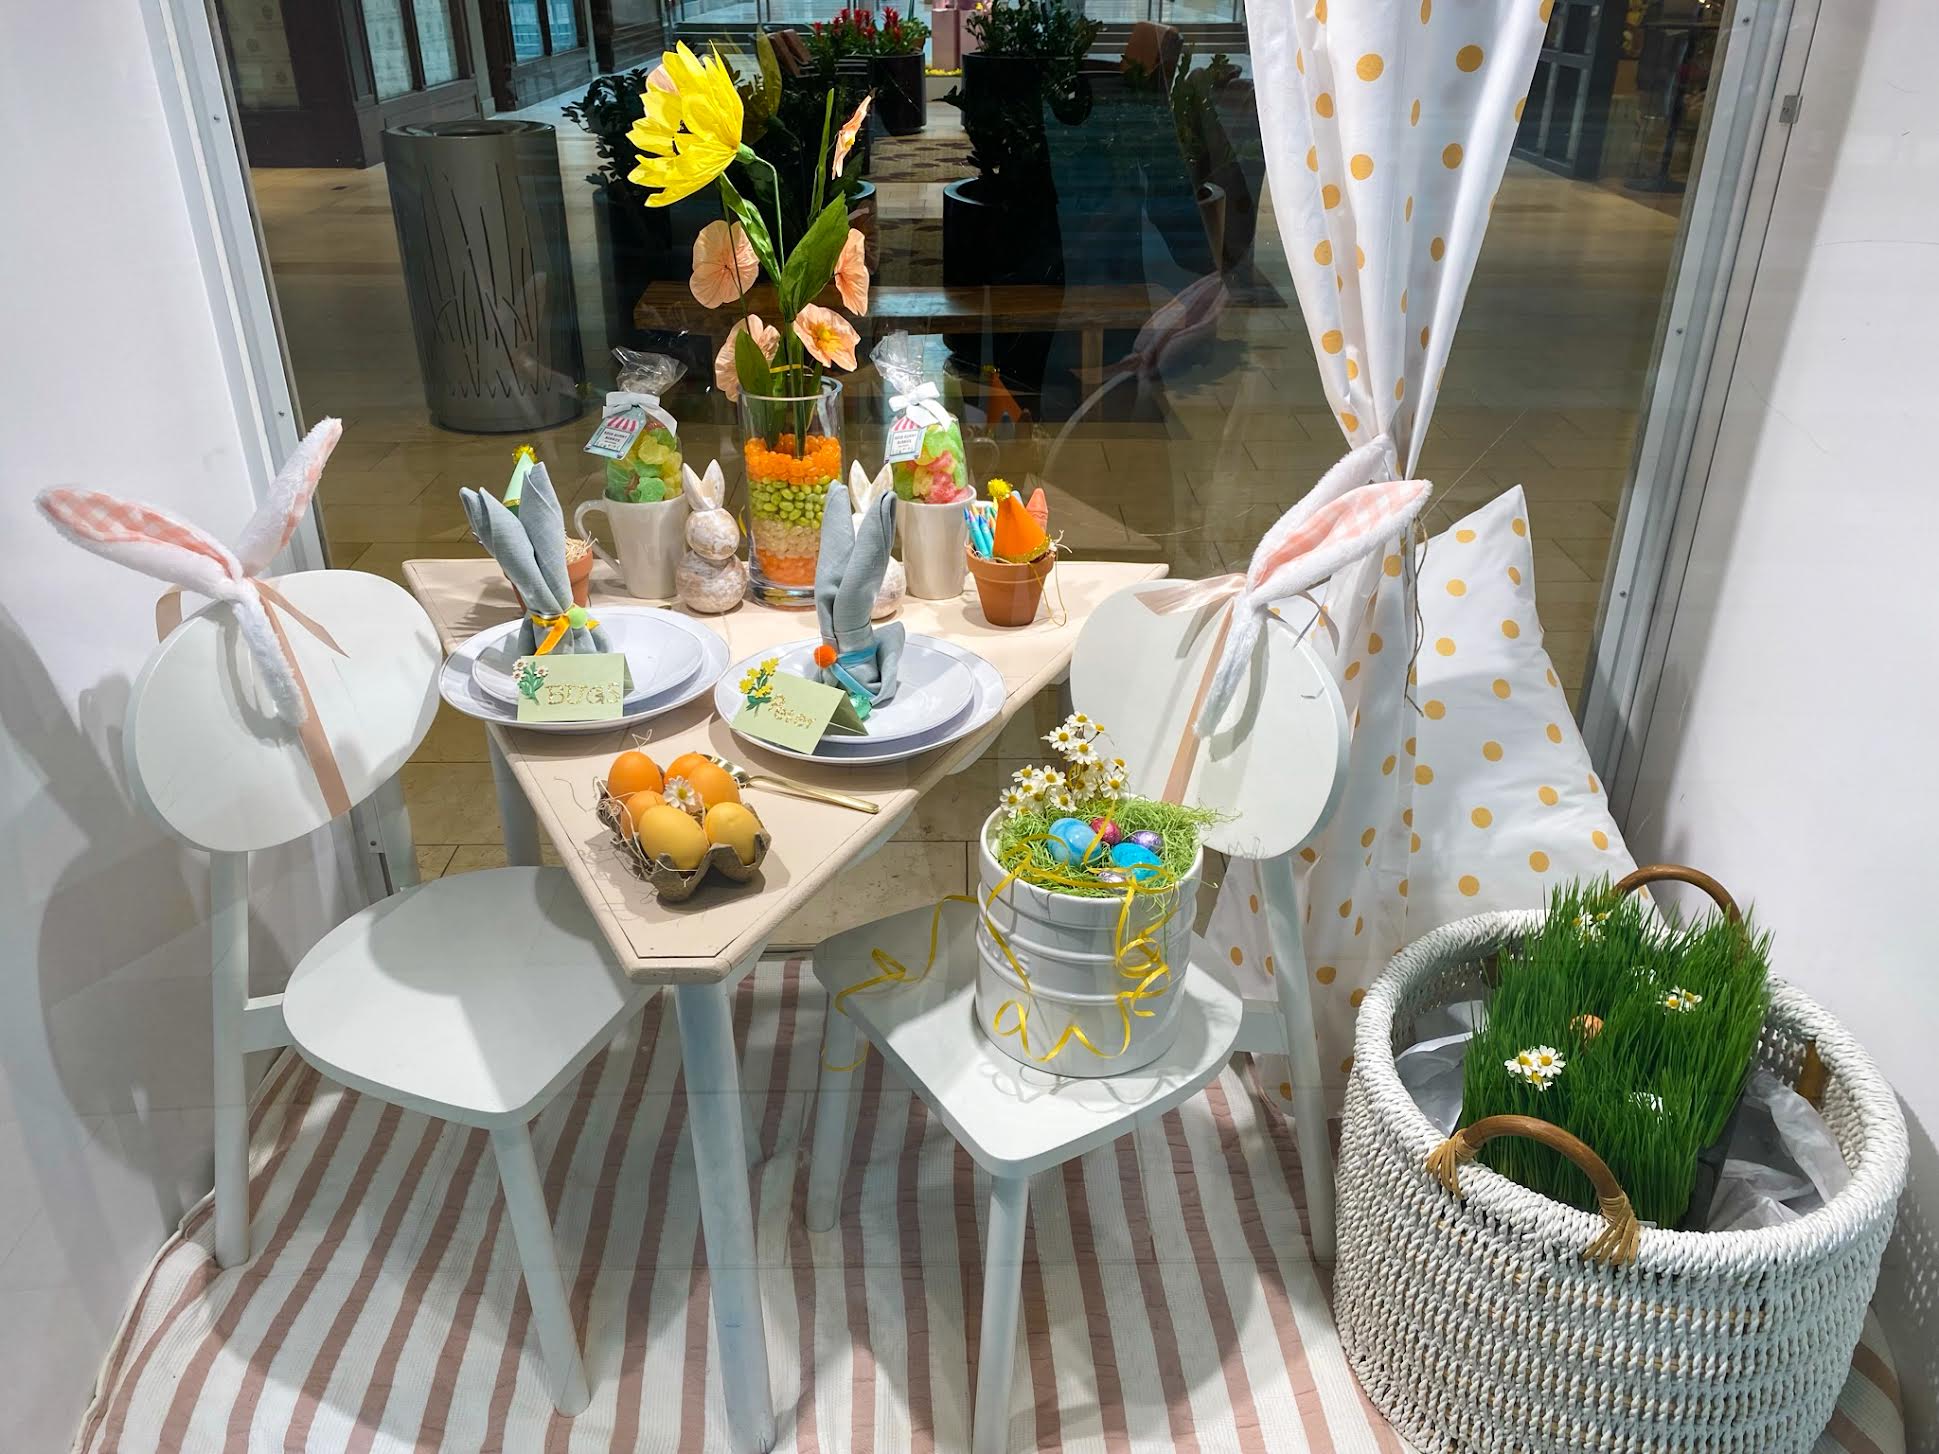 Celebrate Easter at The Bellevue Collection with Photos, Dining, and Fun